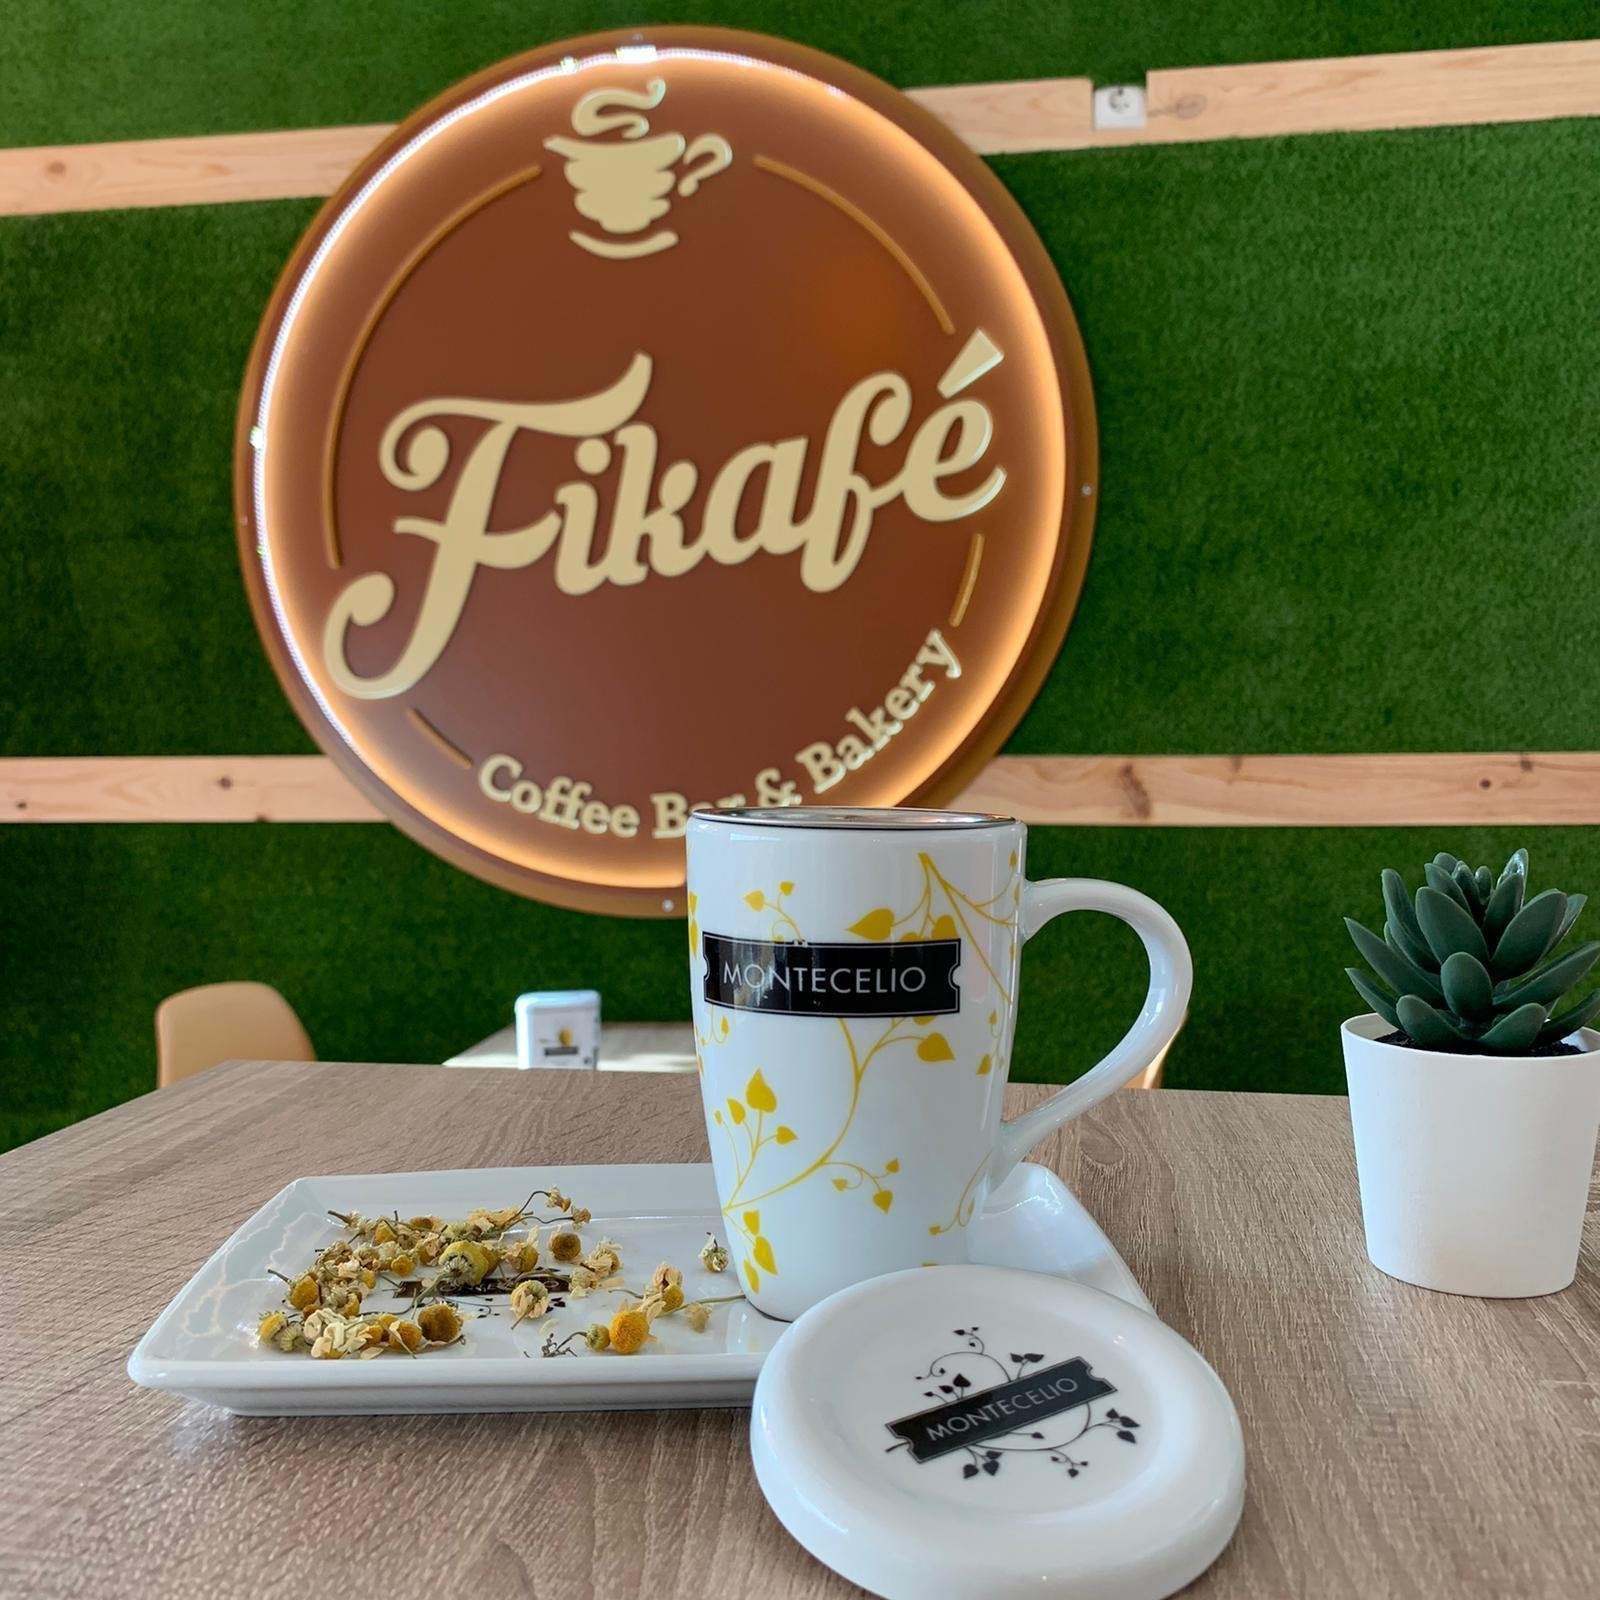 <span class="translation_missing" title="translation missing: en.meta.location_title, location_name: Fikafé coffee bar &amp; bakery, city: Madrid">Location Title</span>